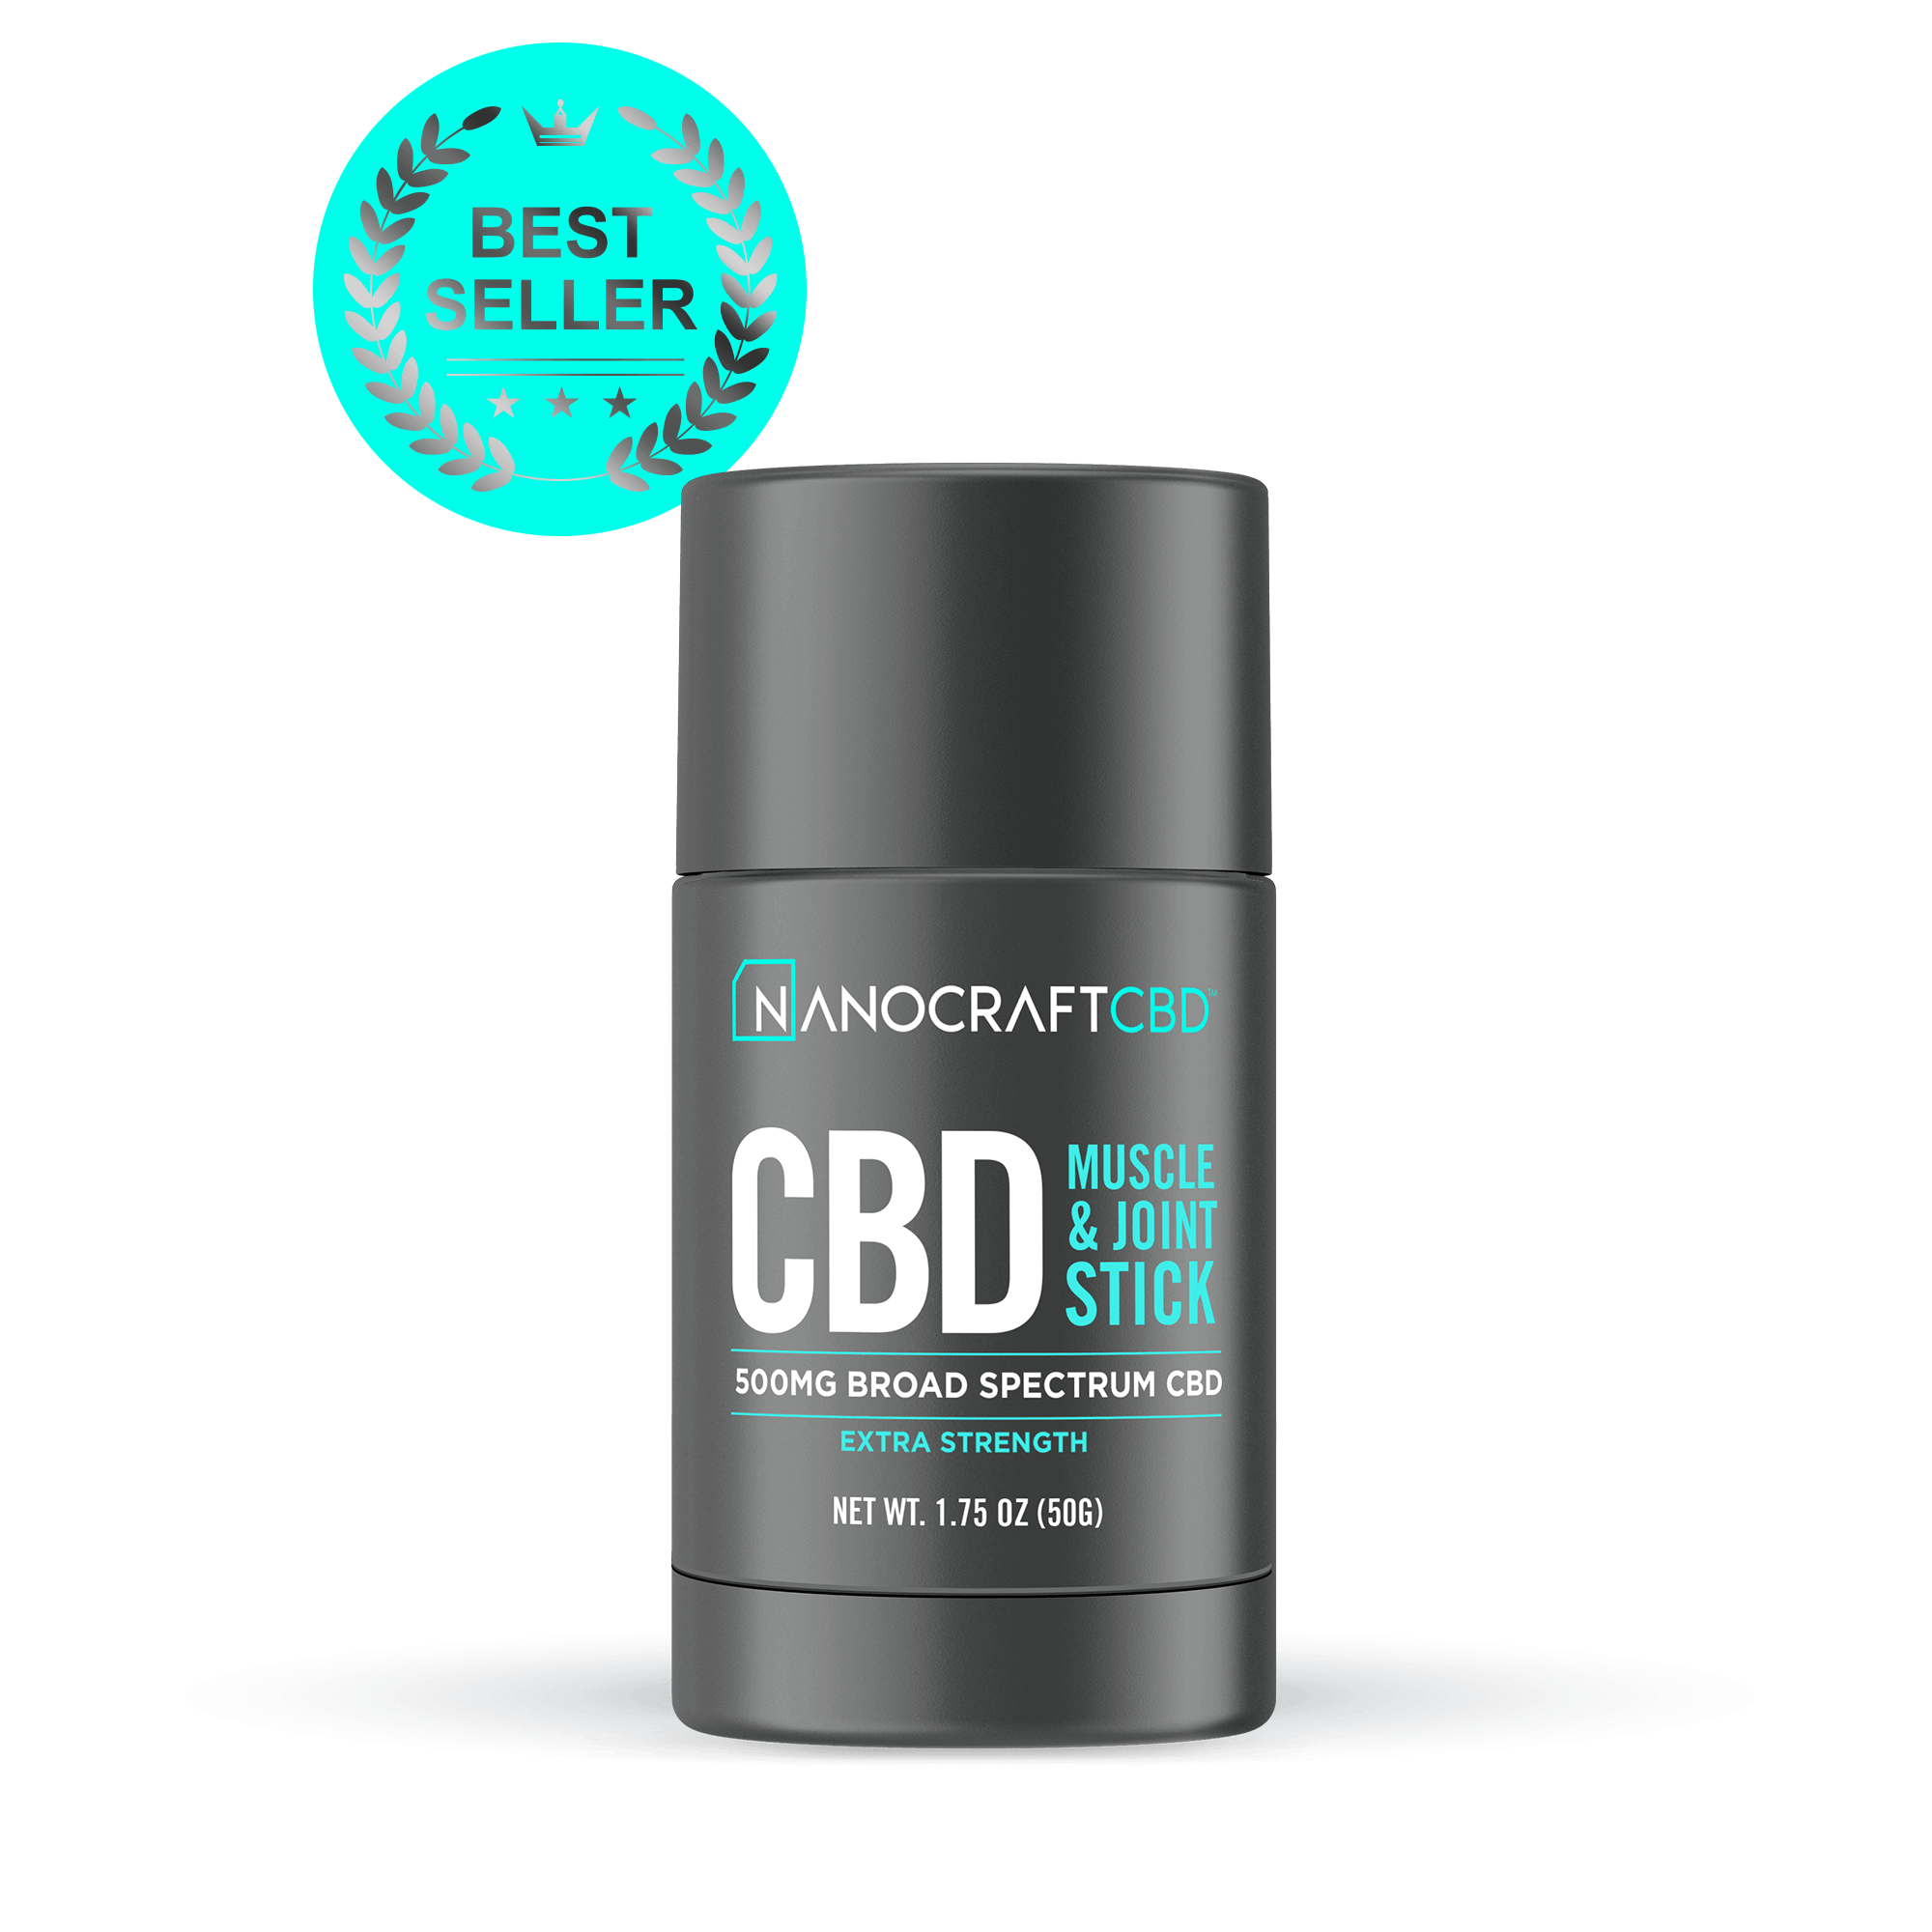 Voted #1 Source for CBD Topicals